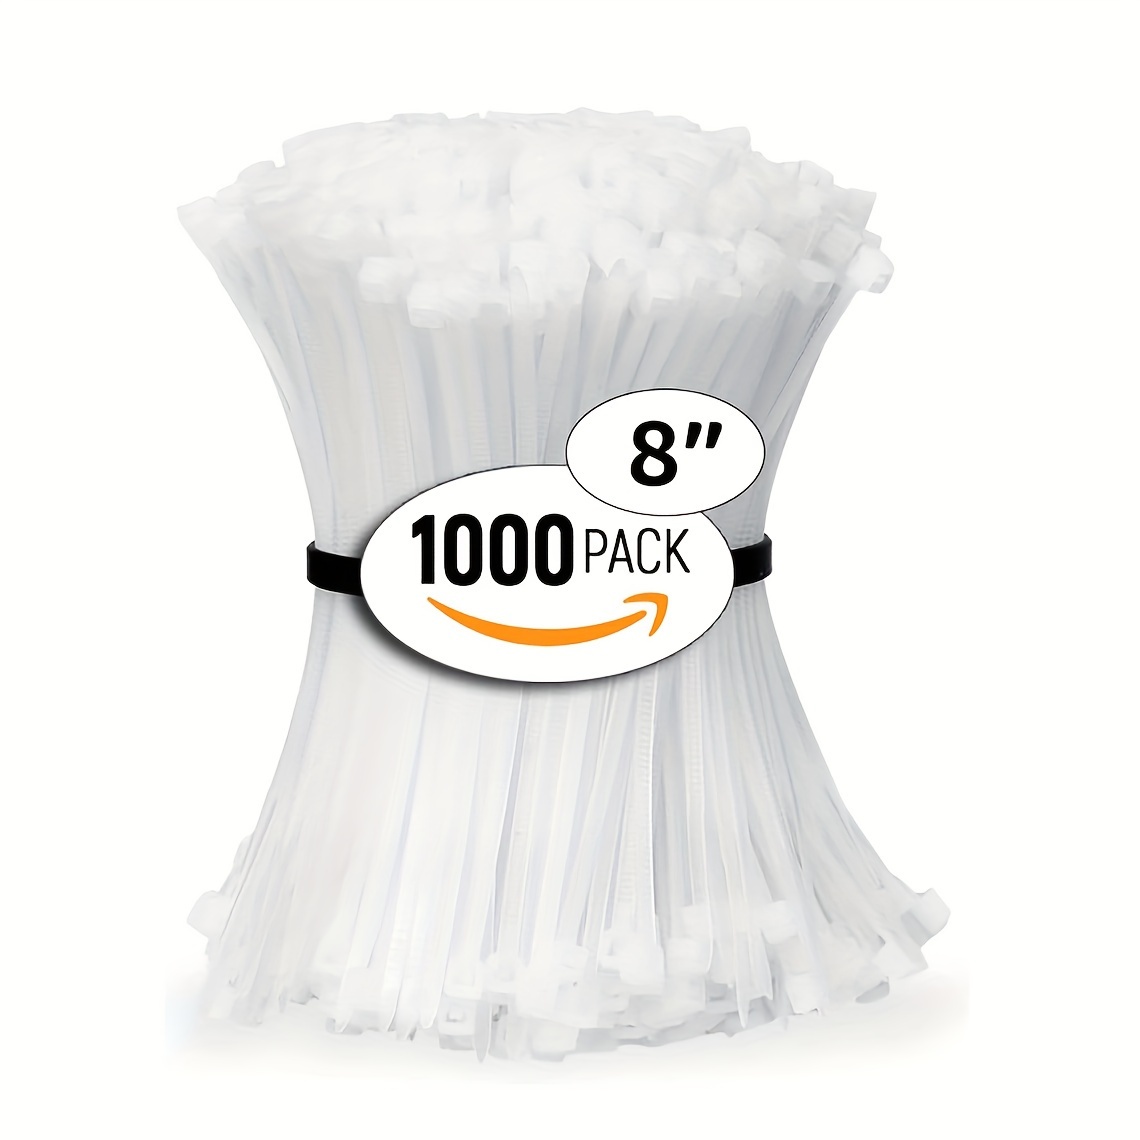 

1000 Pack Nylon Cable Ties, 8 Inch Self-locking Zip Ties, White Plastic Straps For Cable Management And Organization